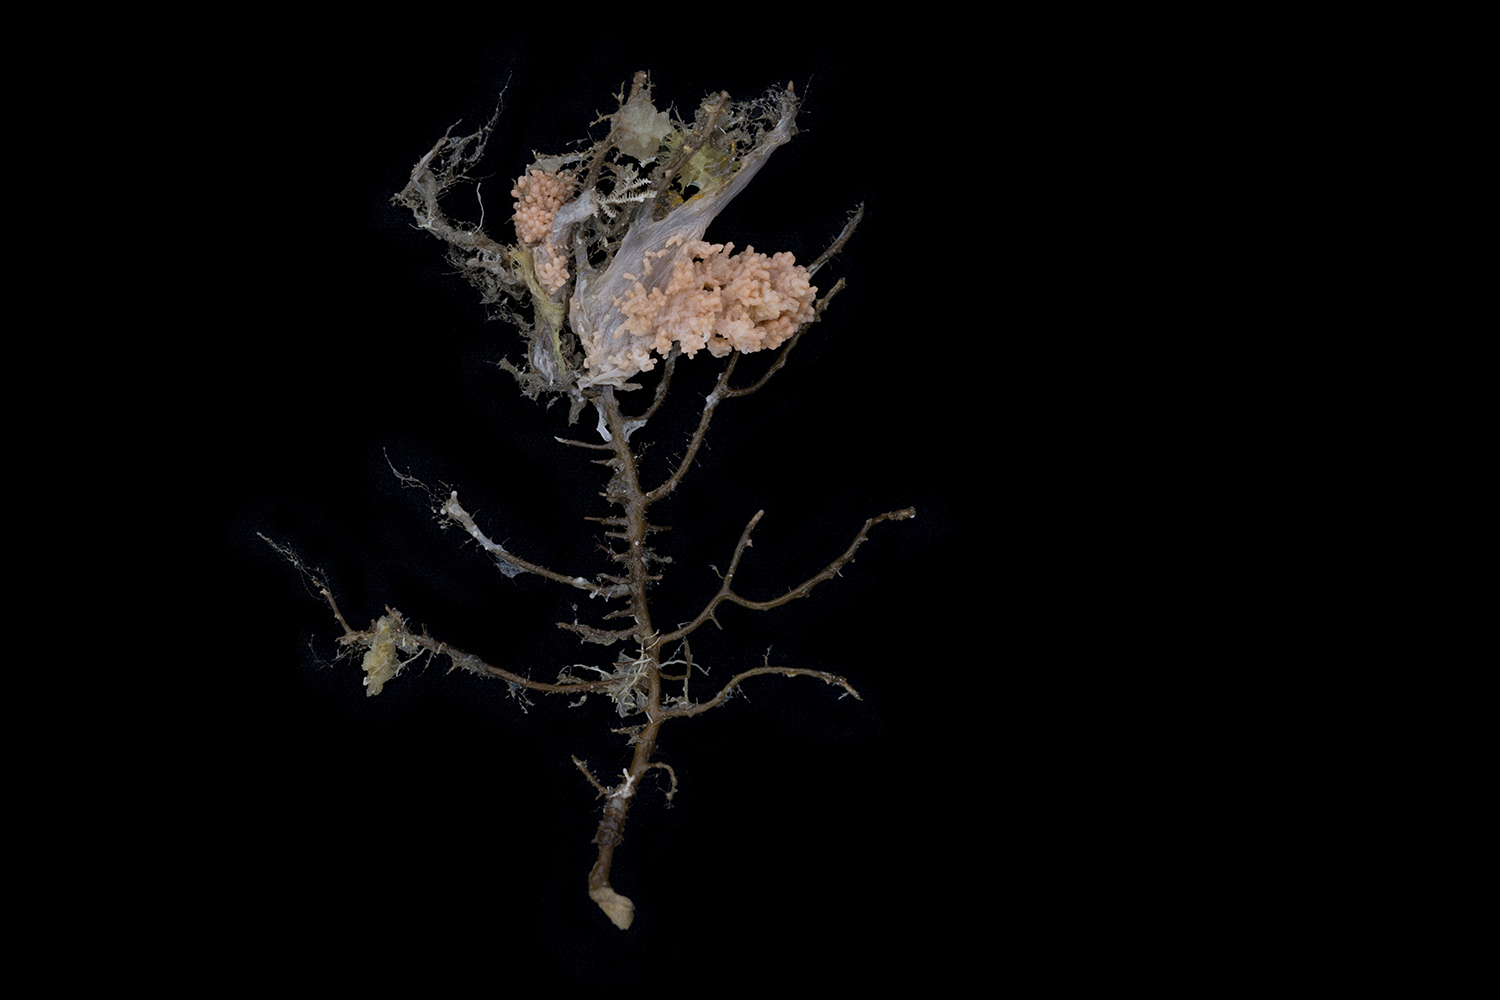 Many organisms are utilizing this dead gorgonian coral skeleton for substrate on which to attach: such as demosponges, hexactinellid glass sponges, bryozoans (or lace corals) and a pink alcyonacean soft coral.